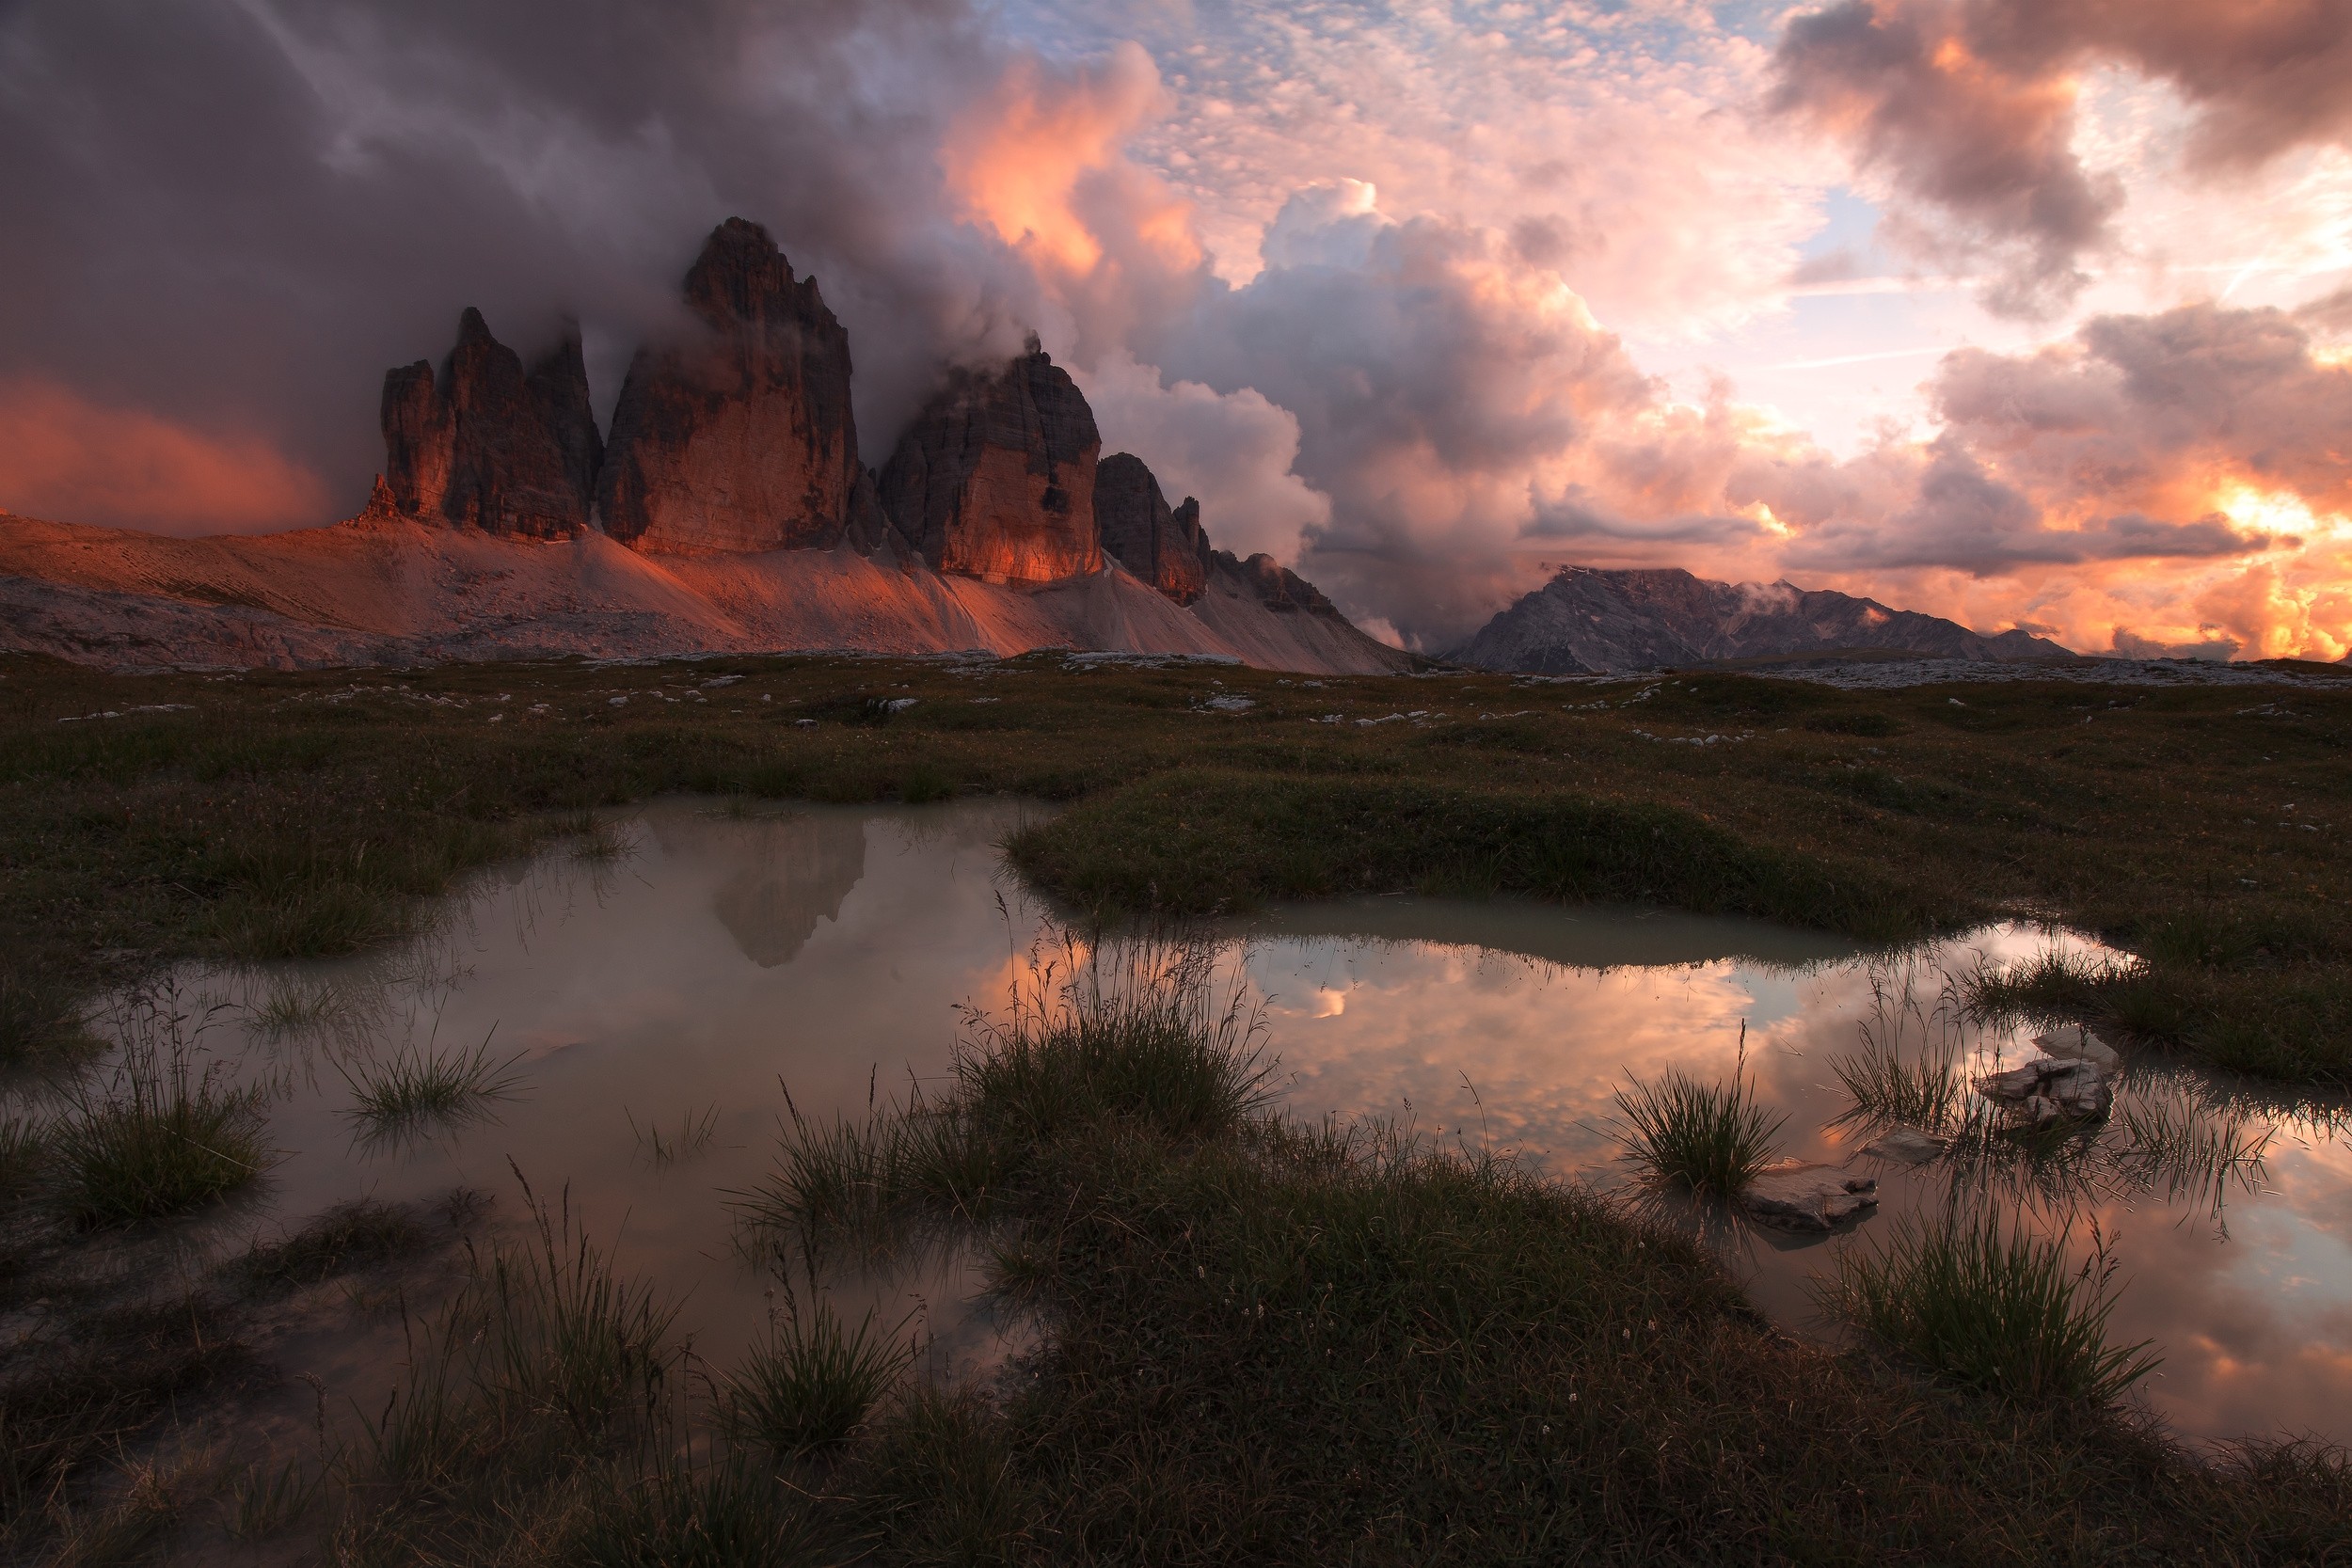 General 2500x1667 nature landscape mountains sunset clouds sunlight pond grass sky Italy